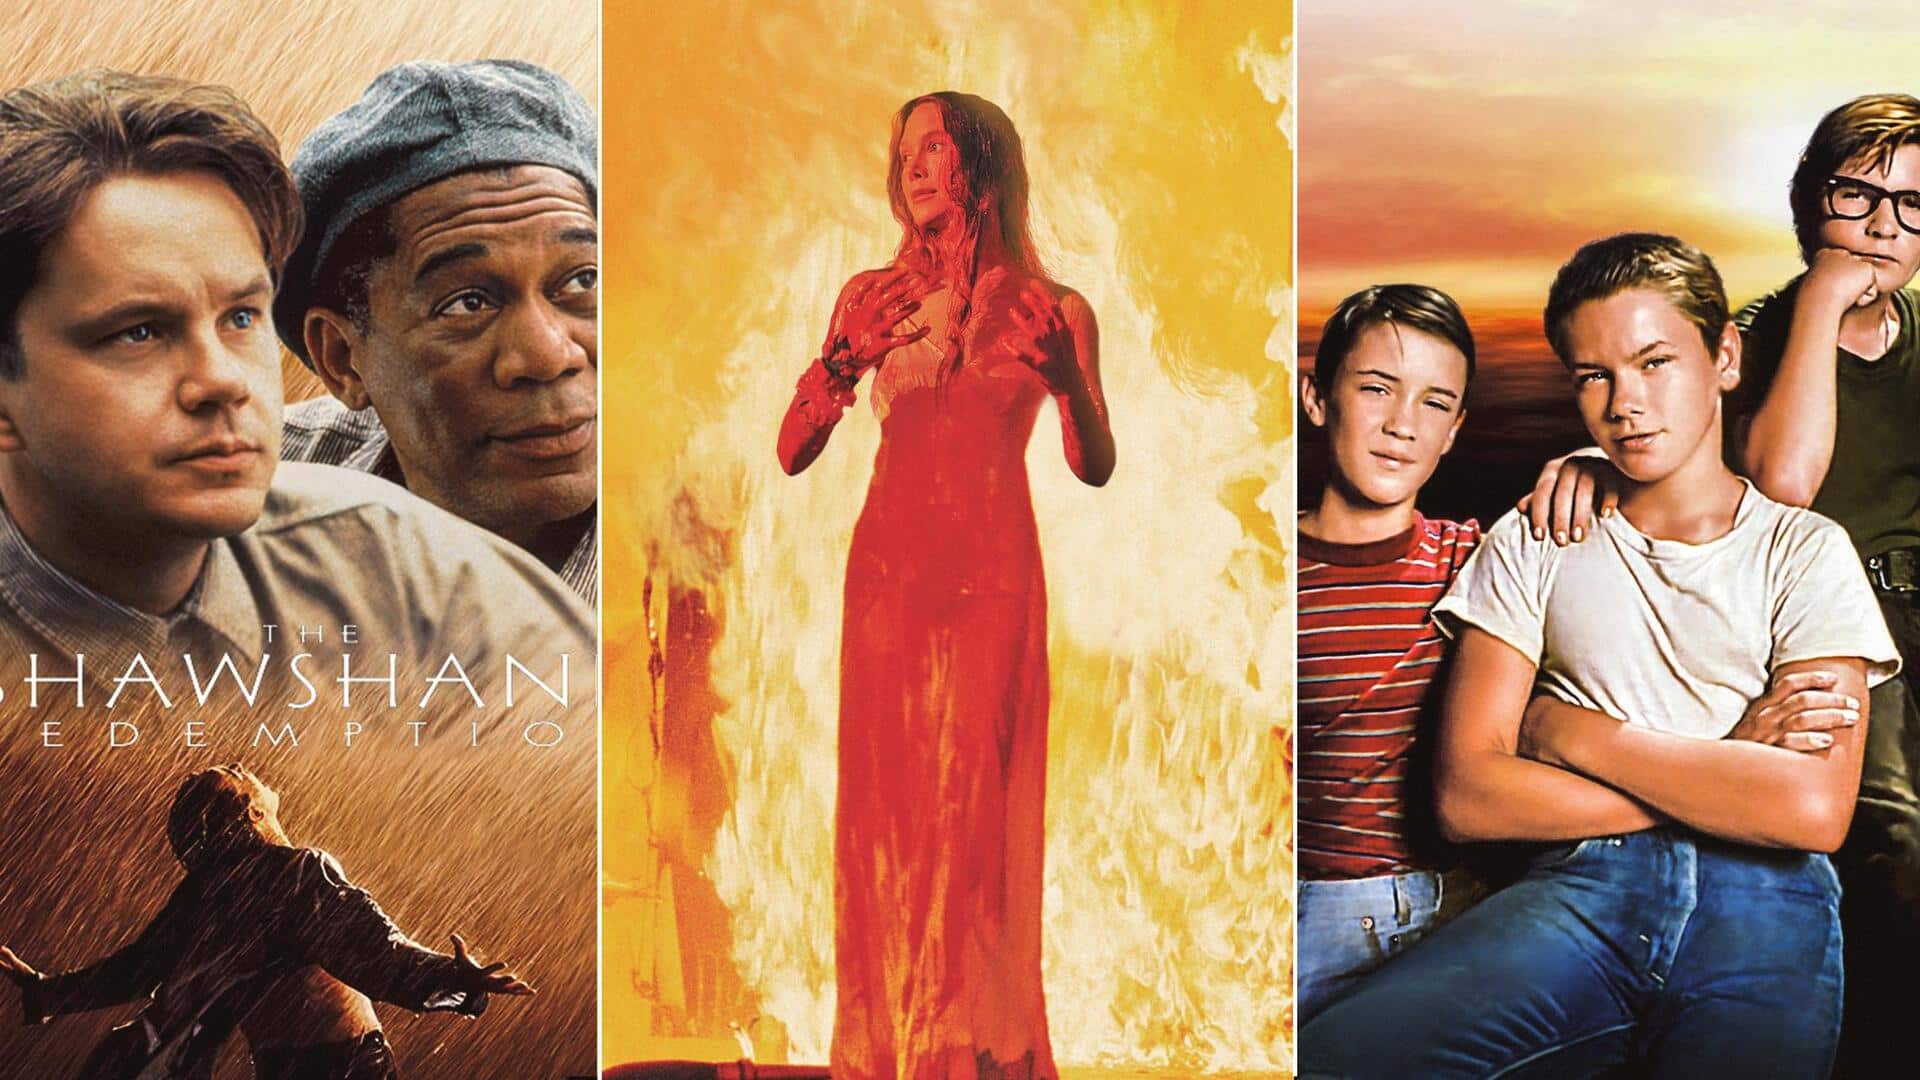 Carrie The Shawshank Redemption Best Stephen King Books Hollywood Adaptations